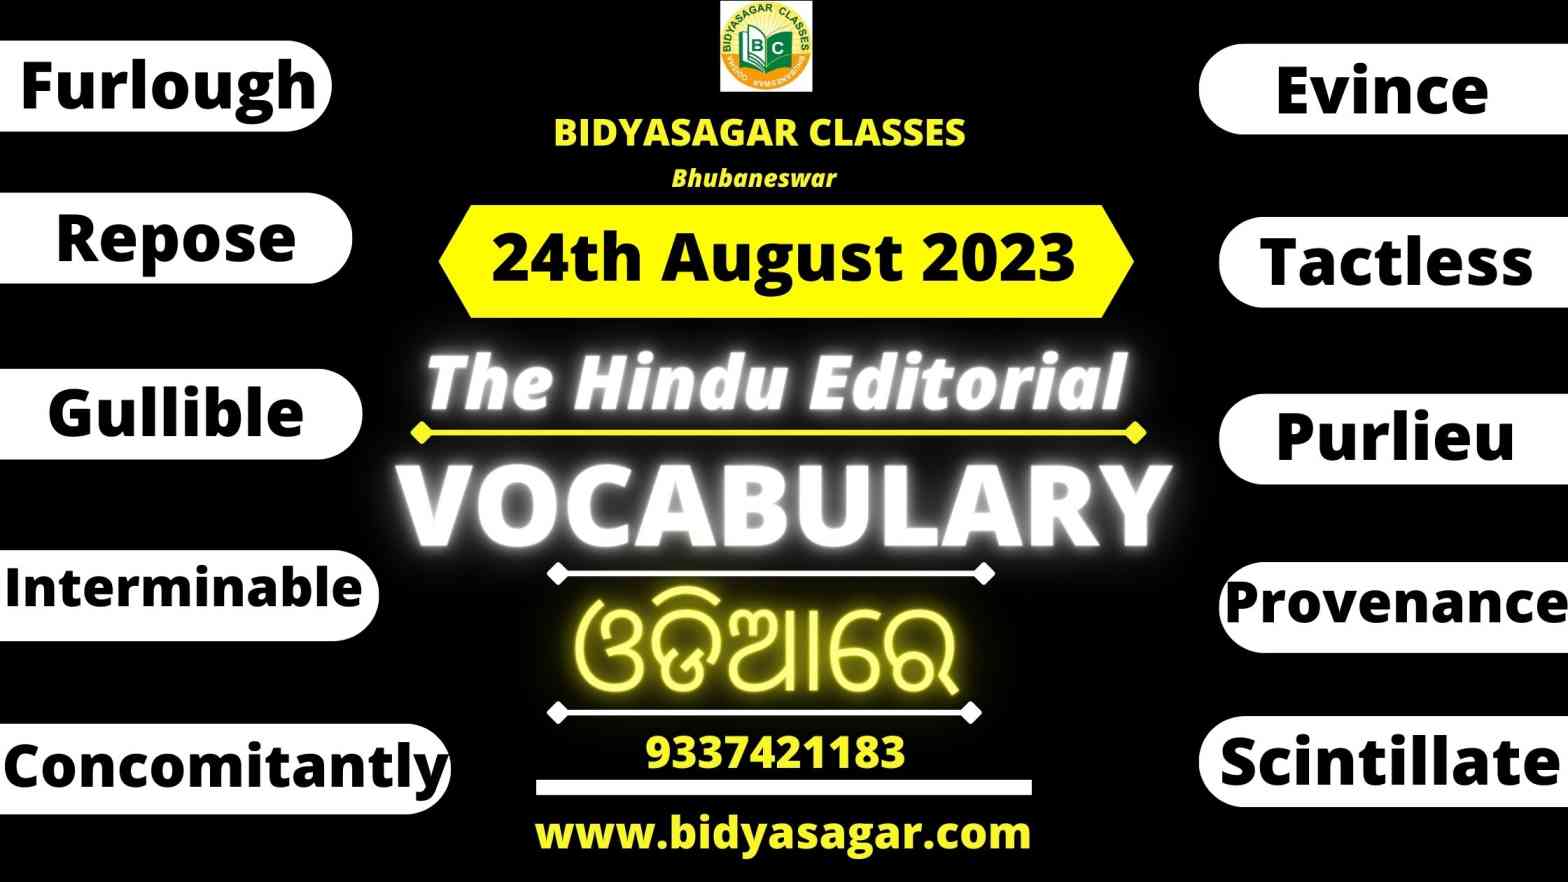 The Hindu Editorial Vocabulary of 24th August 2023